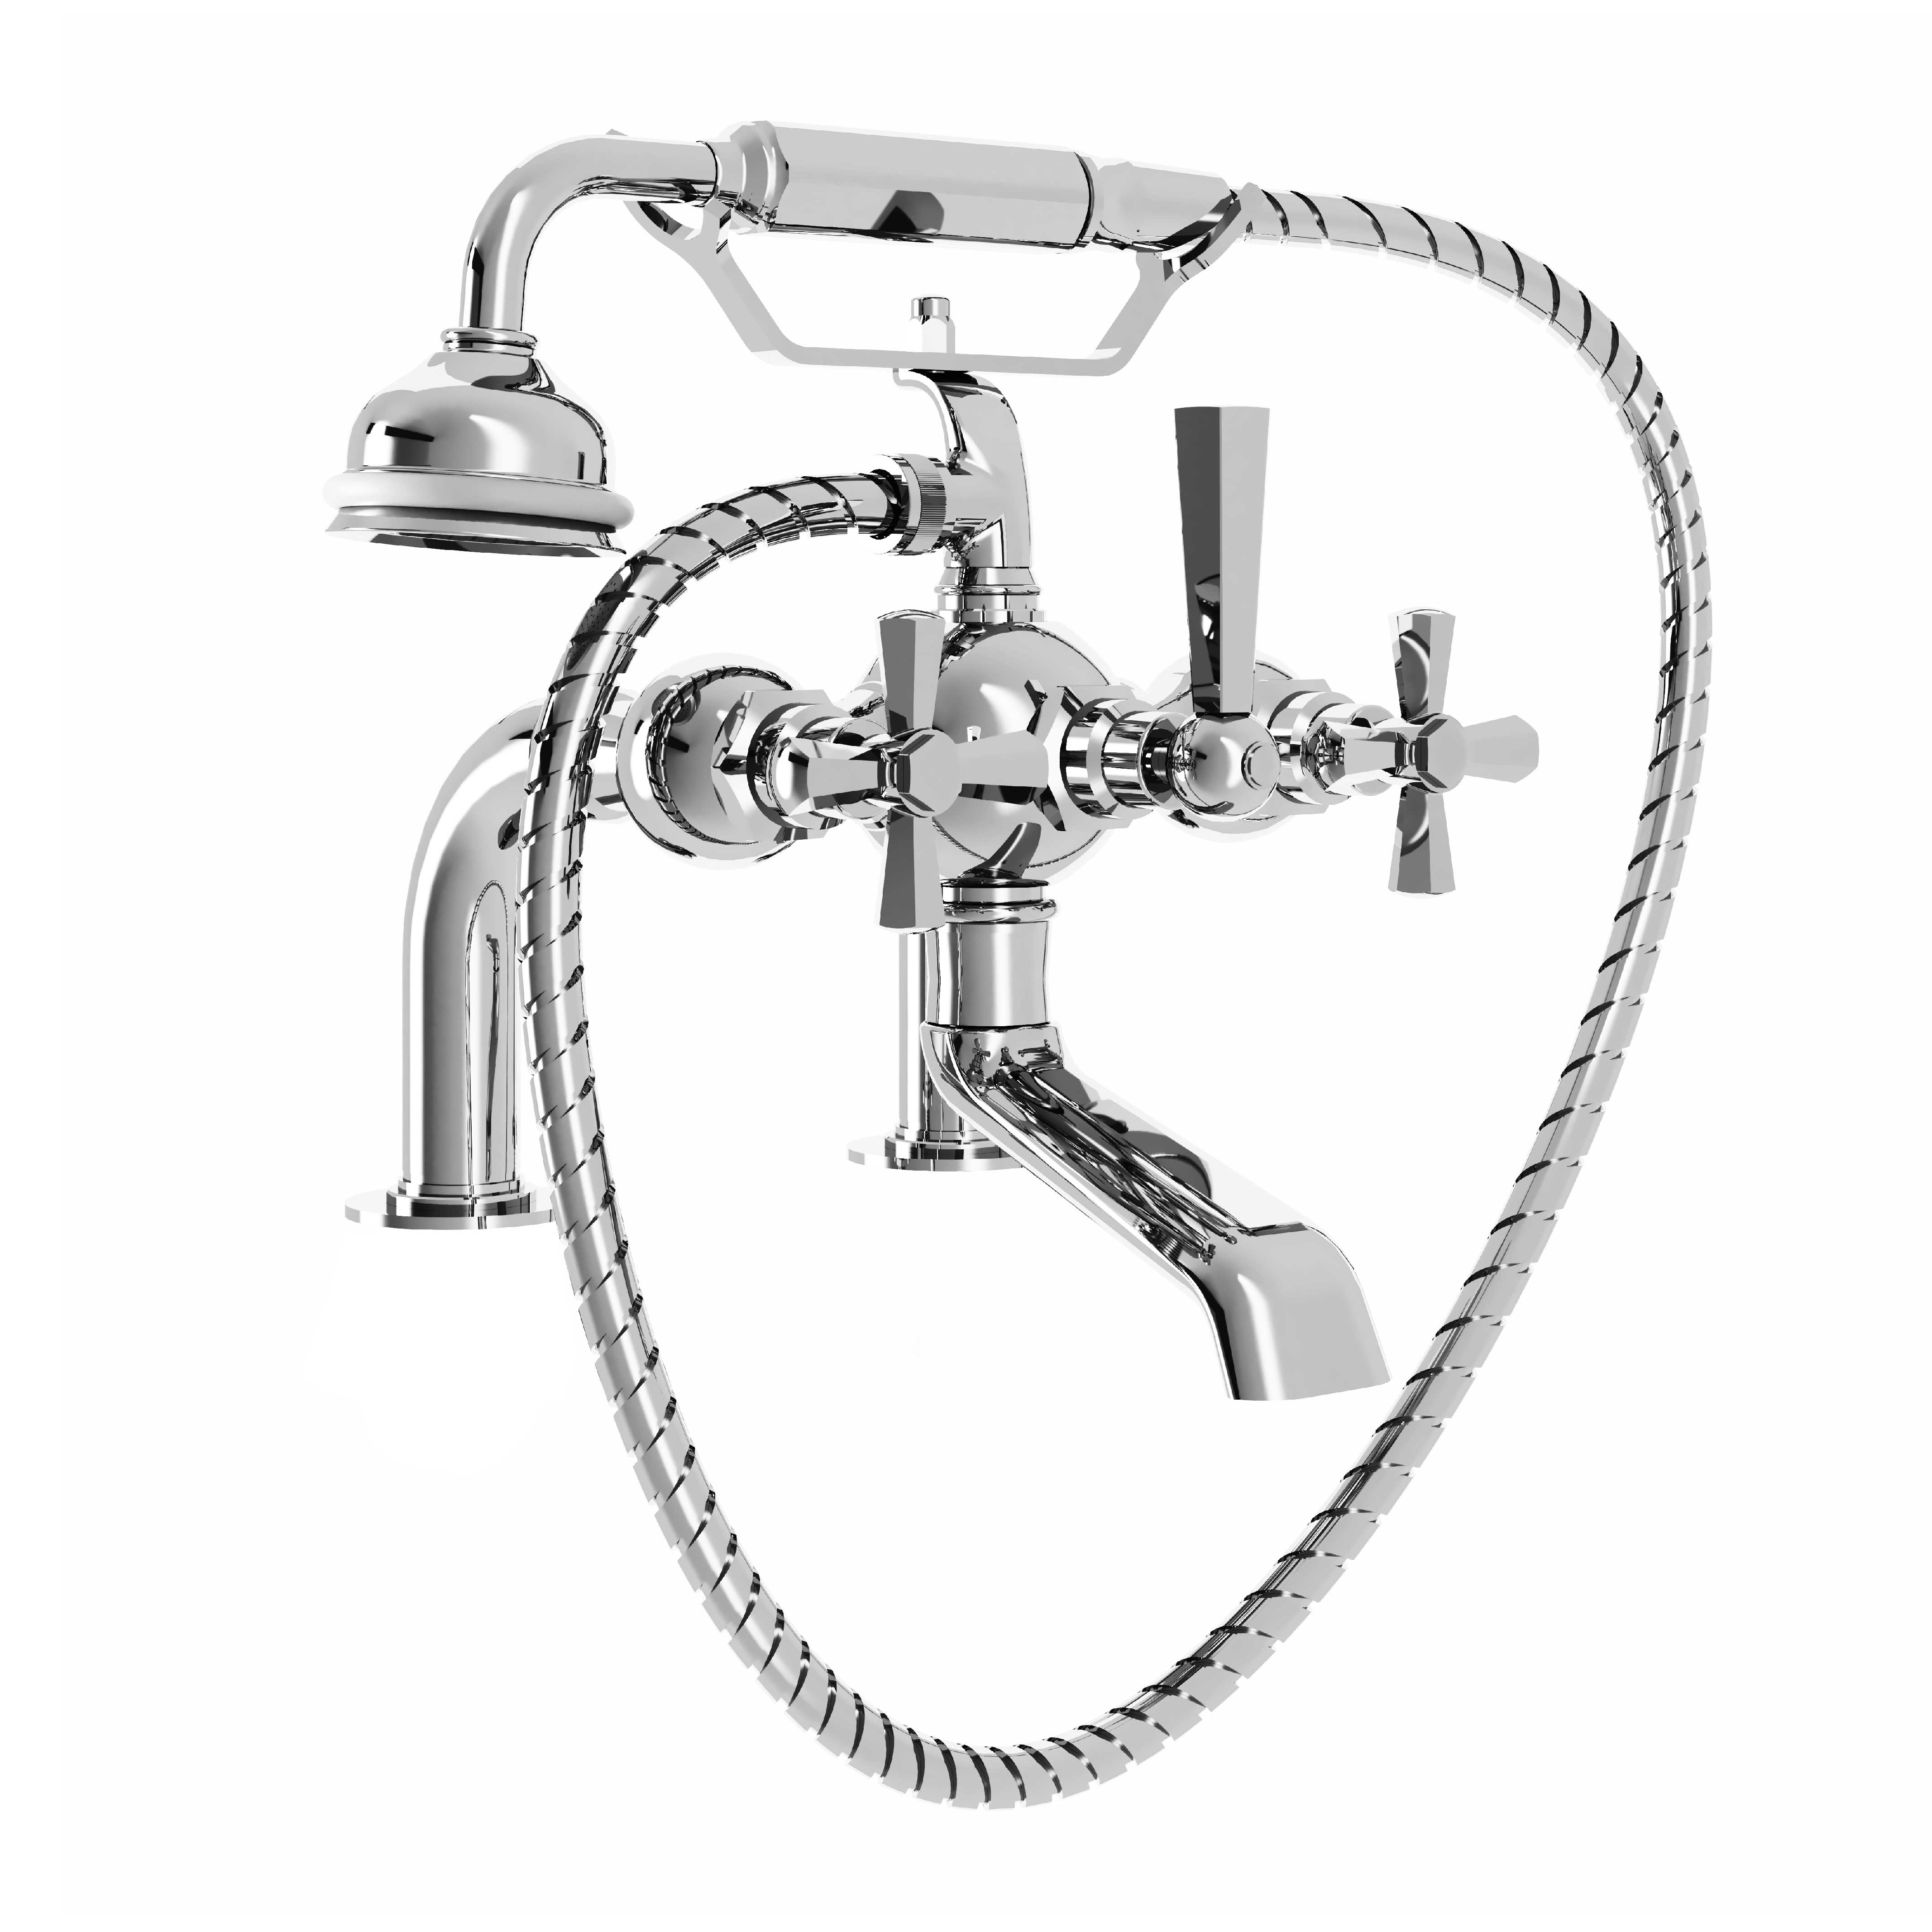 M38-3306 Rim mounted bath and shower mixer